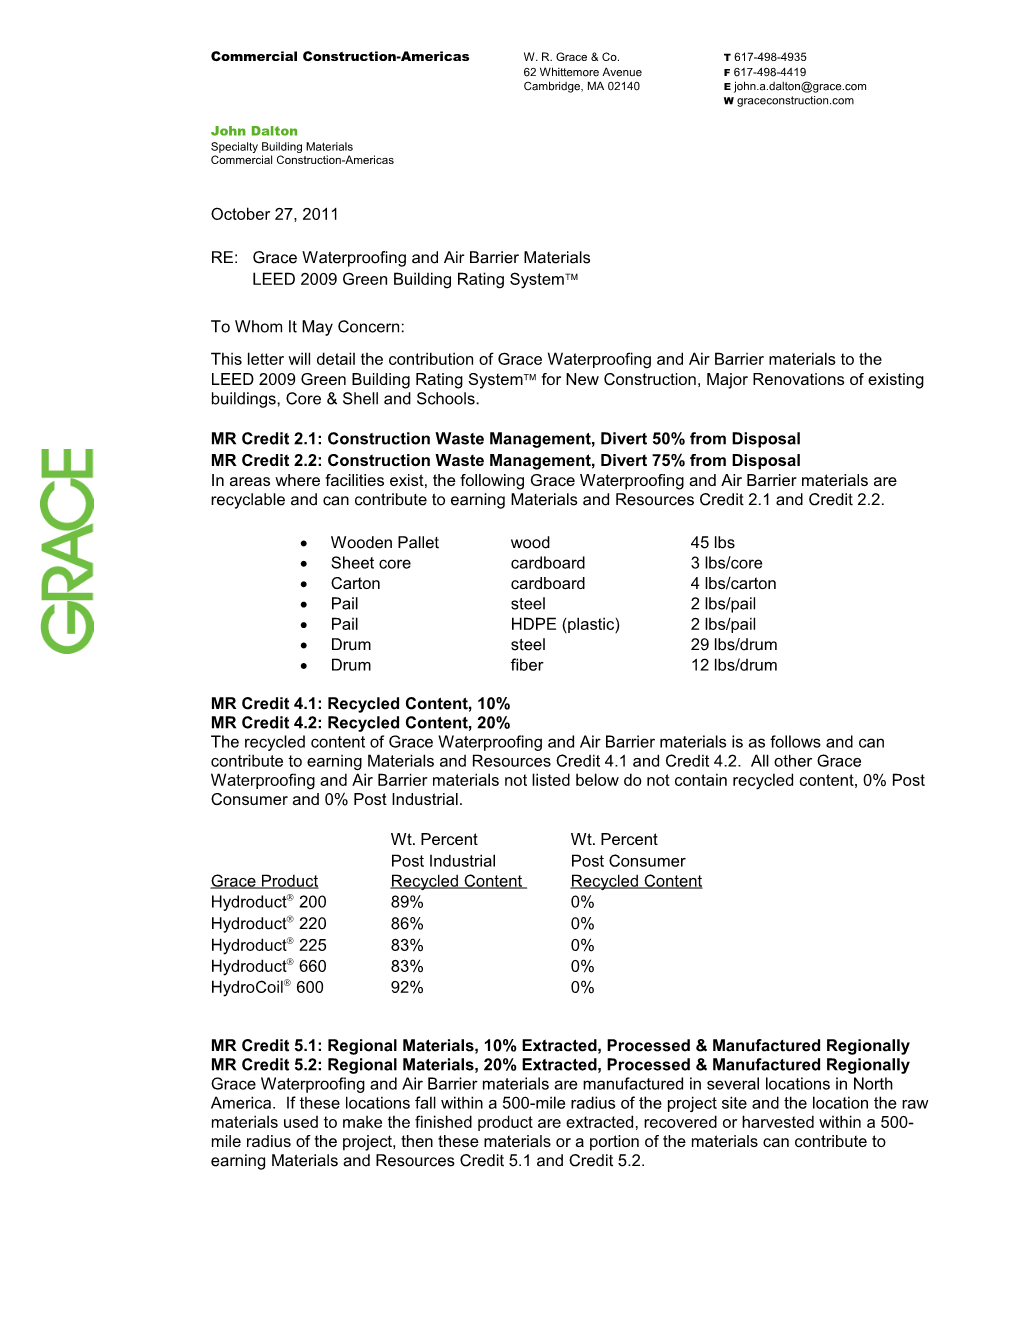 LEED 2009 Green Building Rating System